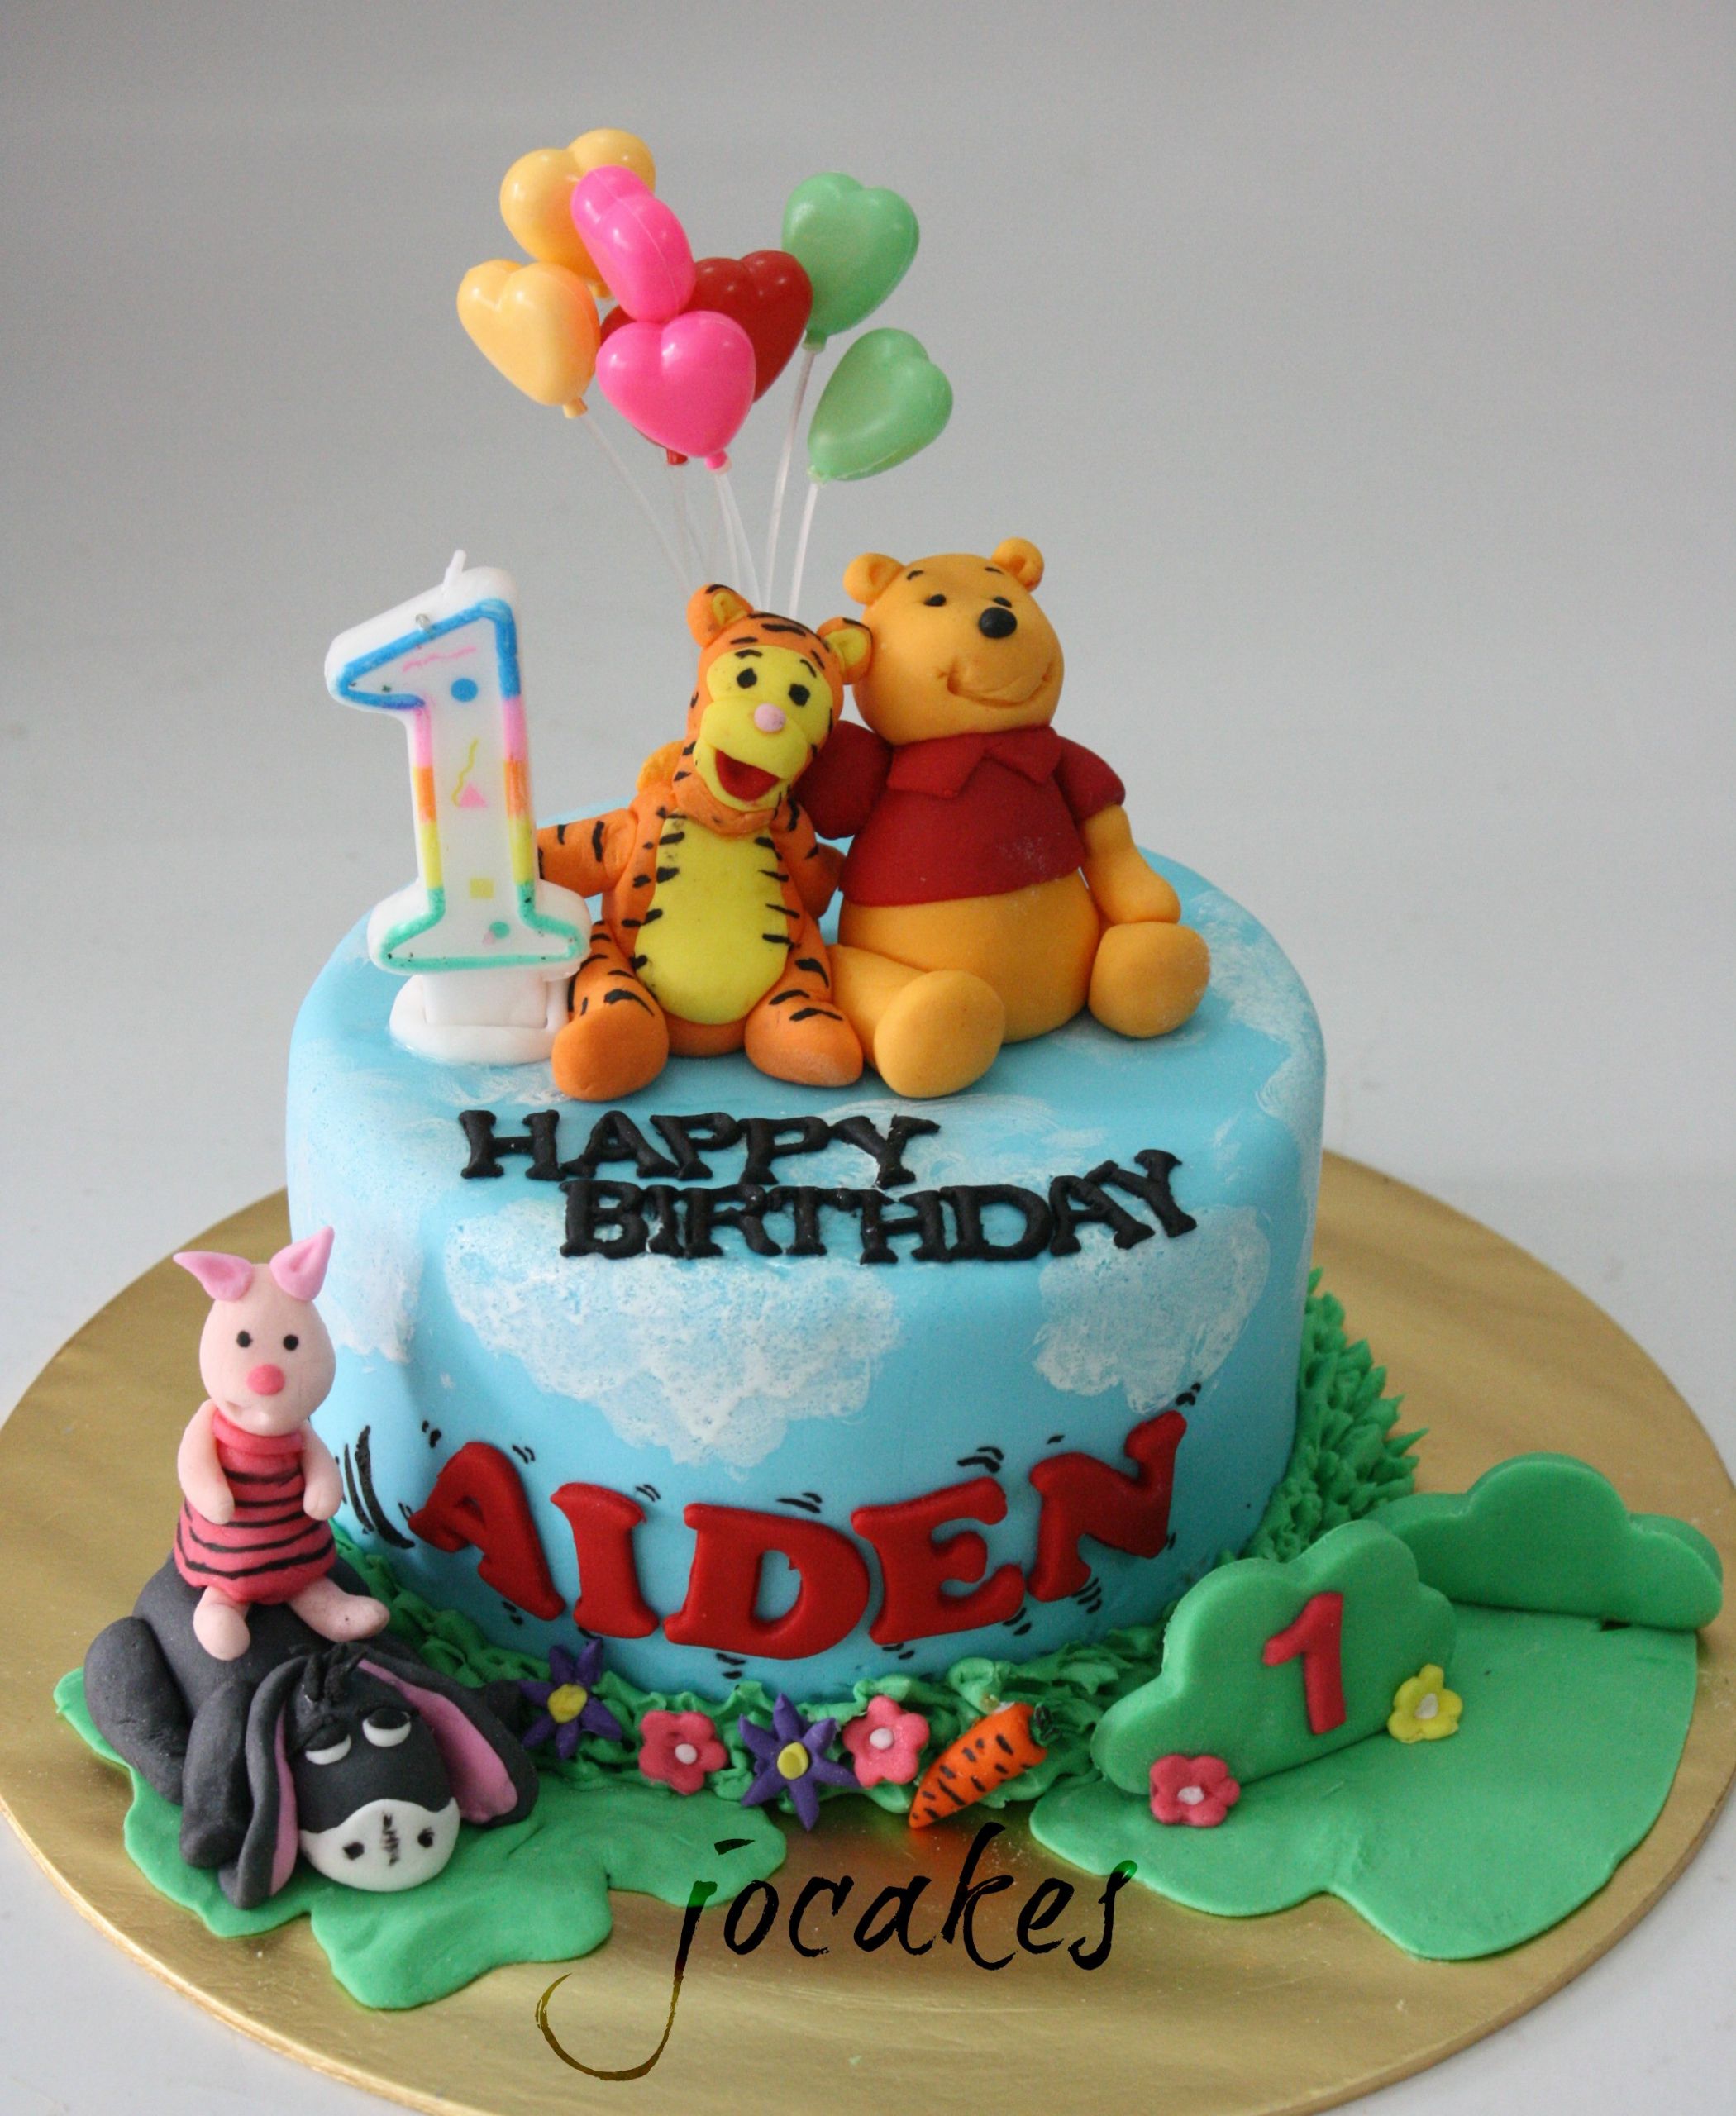 1 Year Old Birthday Cake
 Winnie the Pooh and friends cake for 1 year old boy Aiden